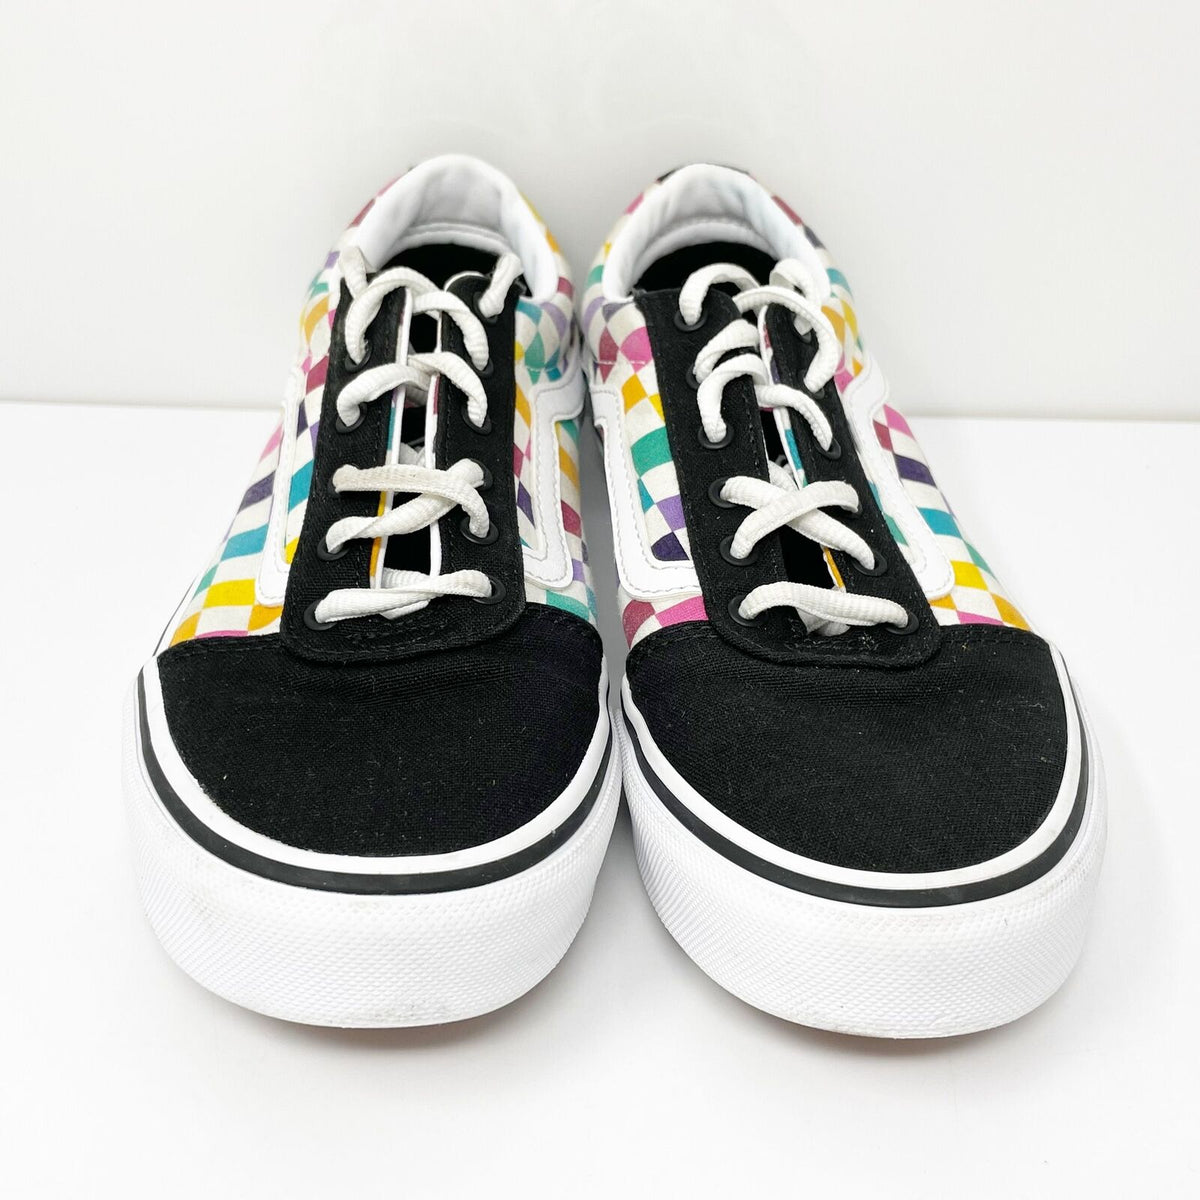 Vans Girls Off The Wall 508731 Black Casual Shoes Sneakers Size 4 ...